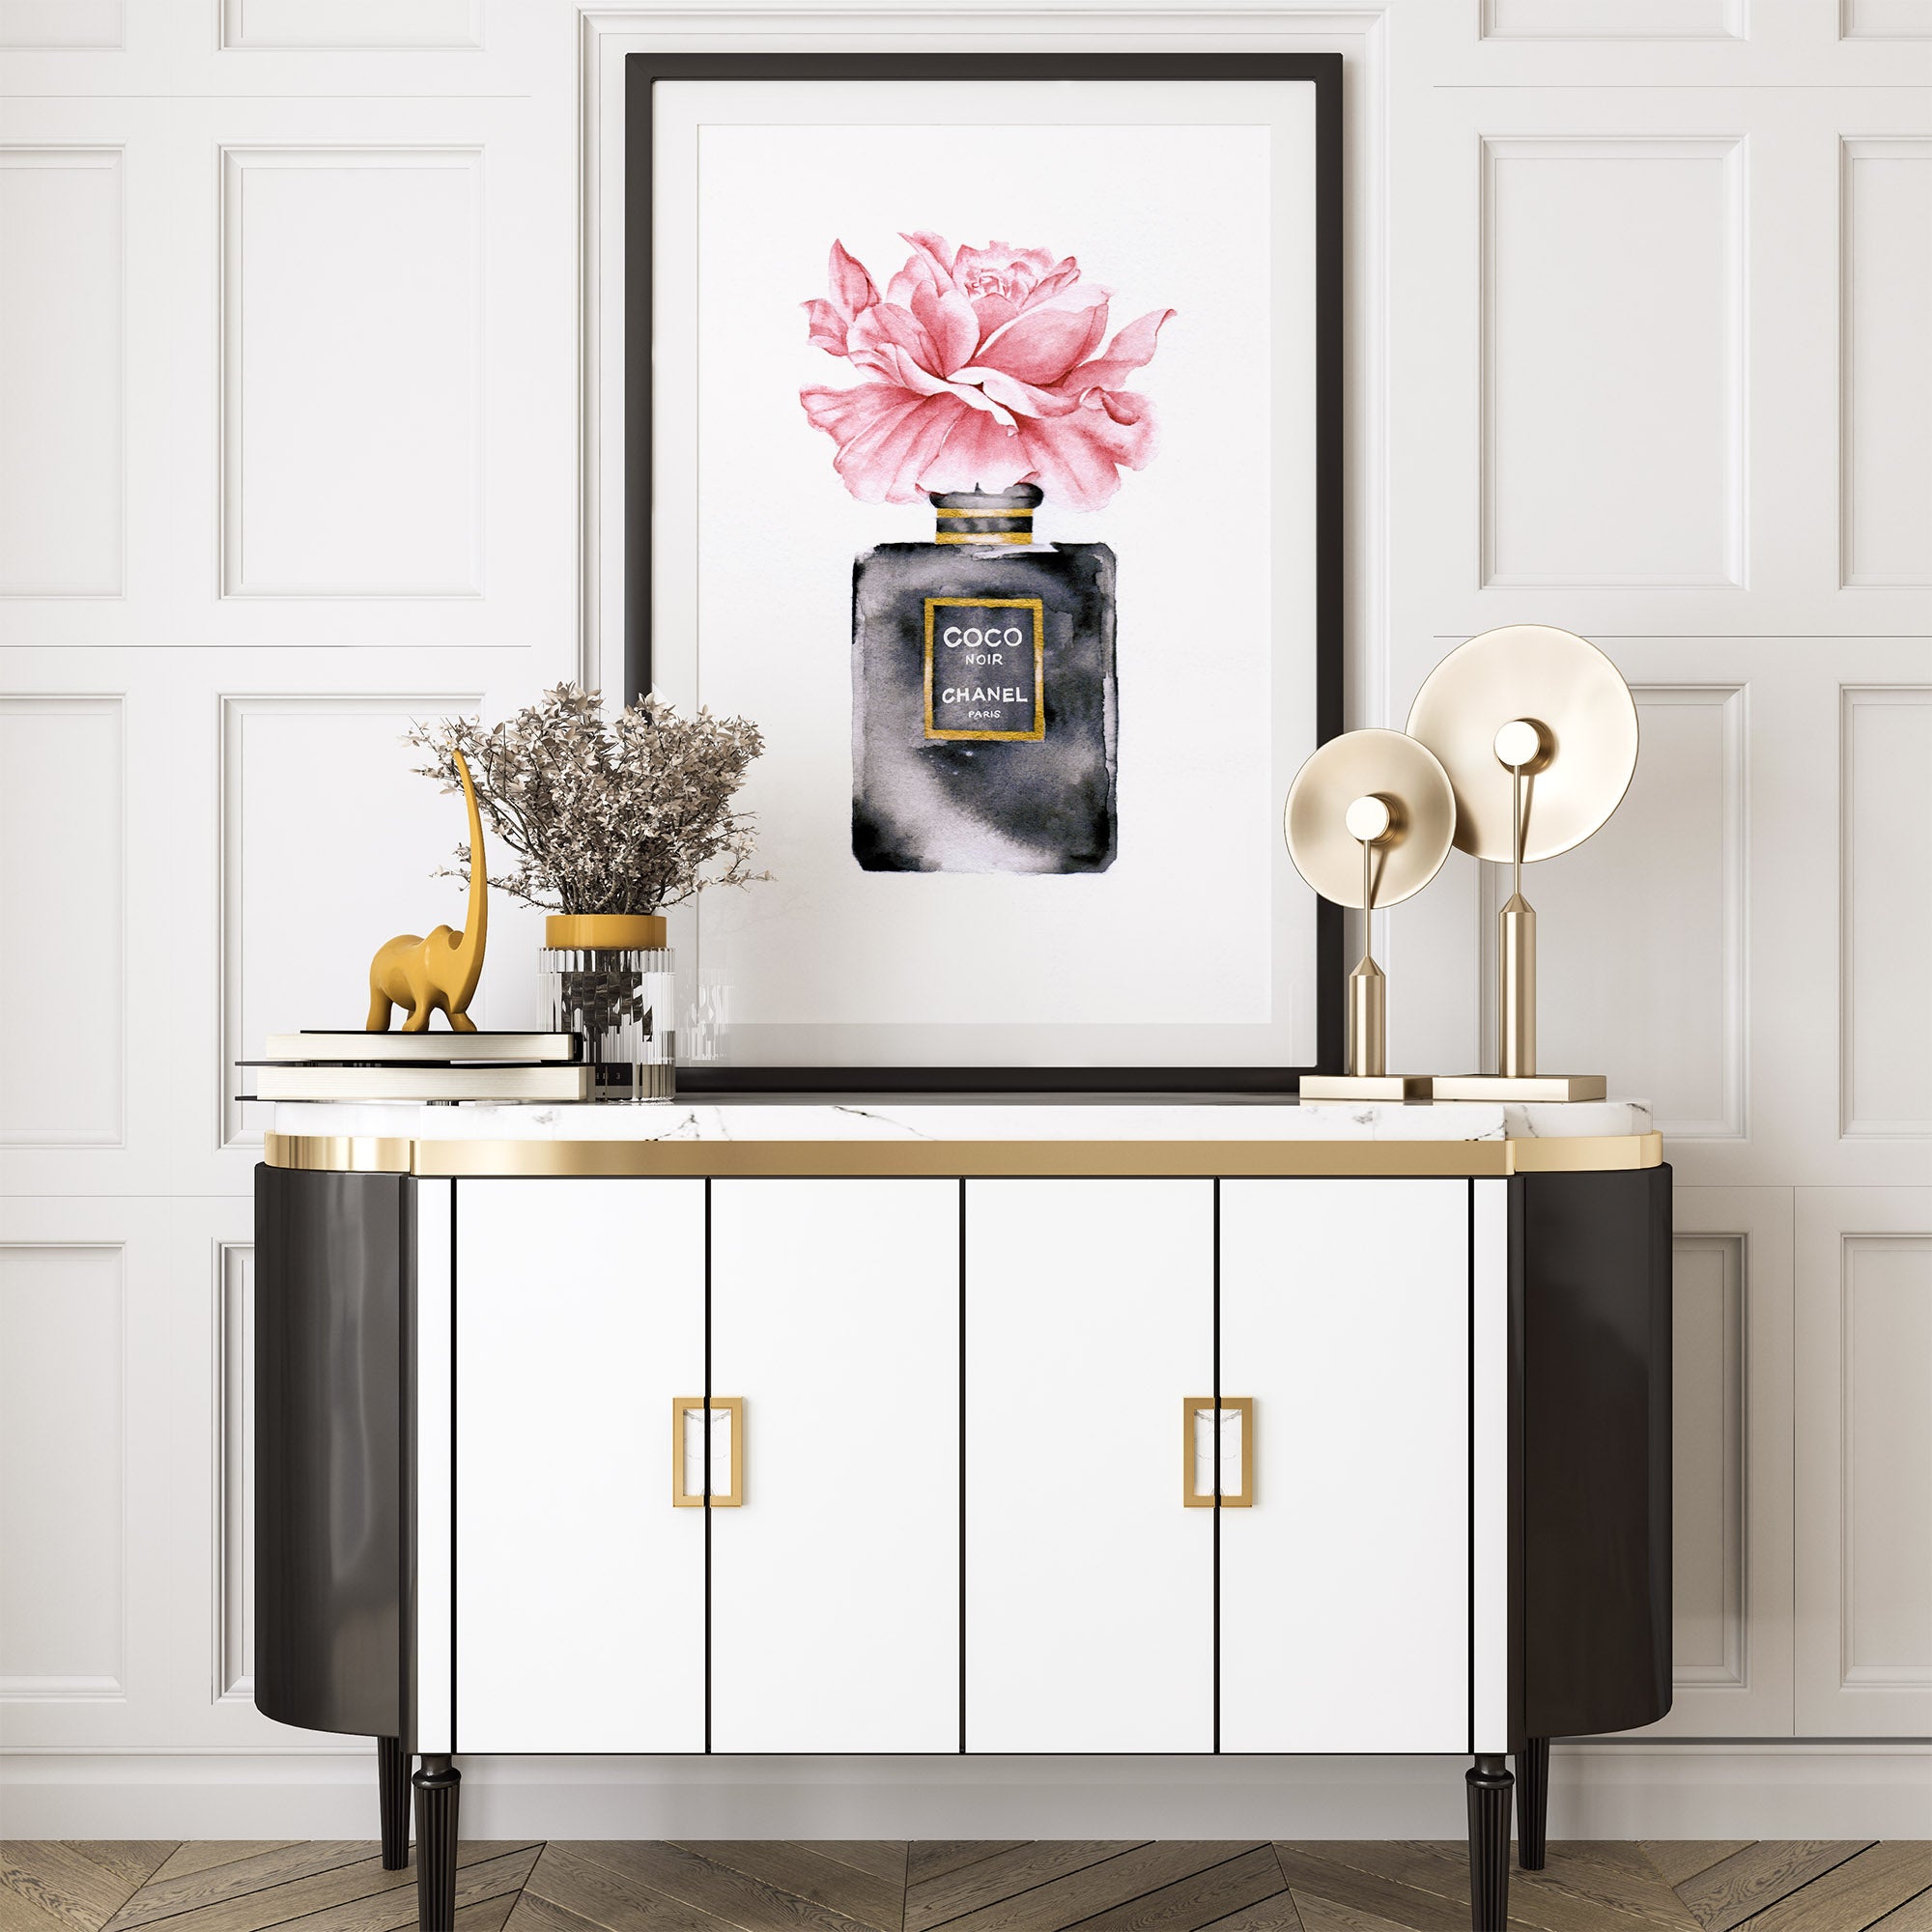 Best Chanel Floral Perfume Framed Art for sale in Brentwood, New